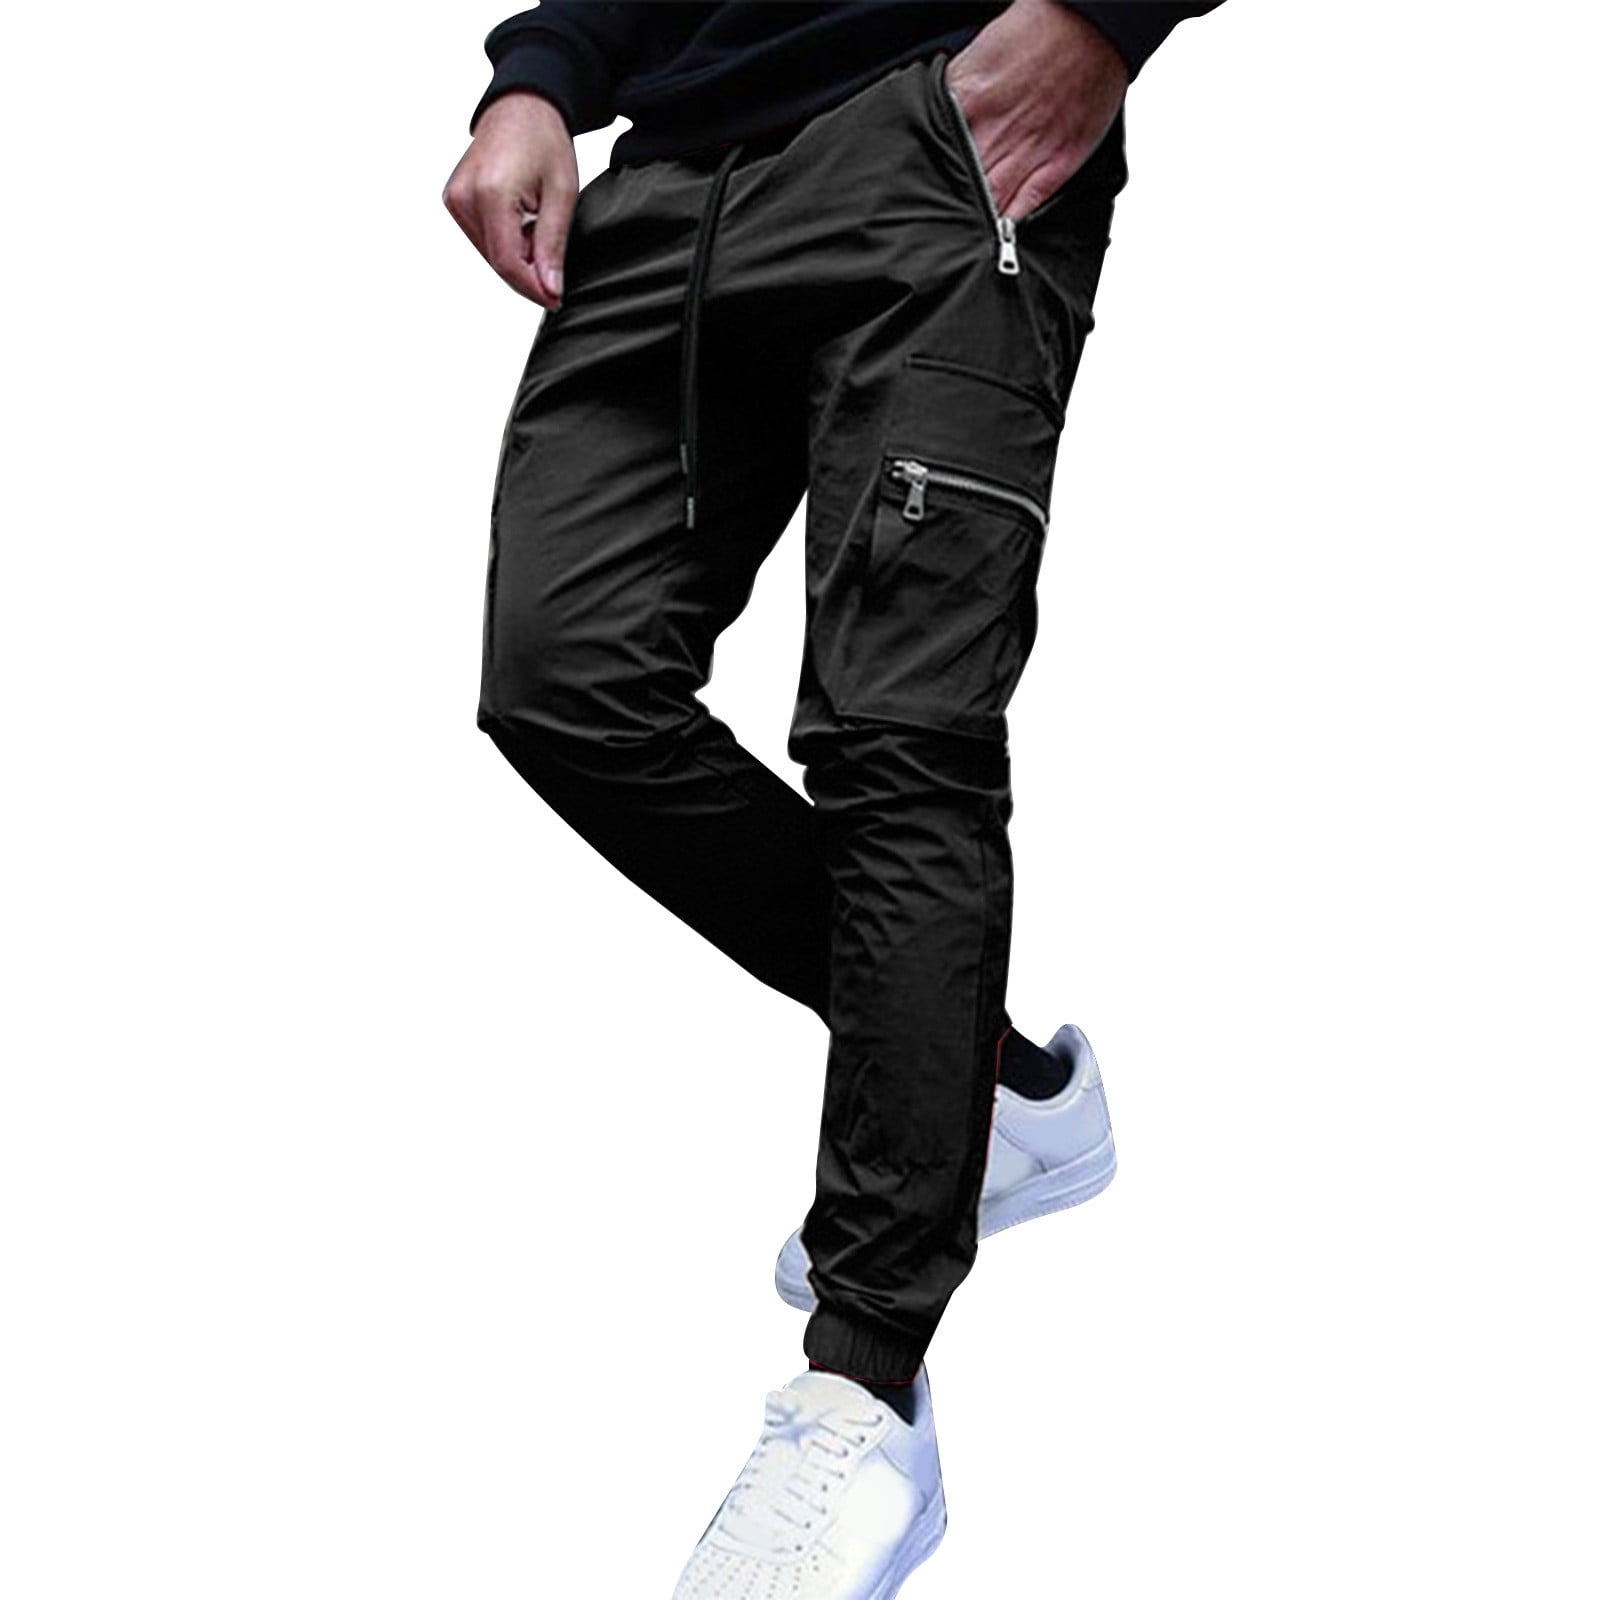 Buy Basix by Apparel 1 - Mens Cotton Formal Pants (38, Black) at Amazon.in